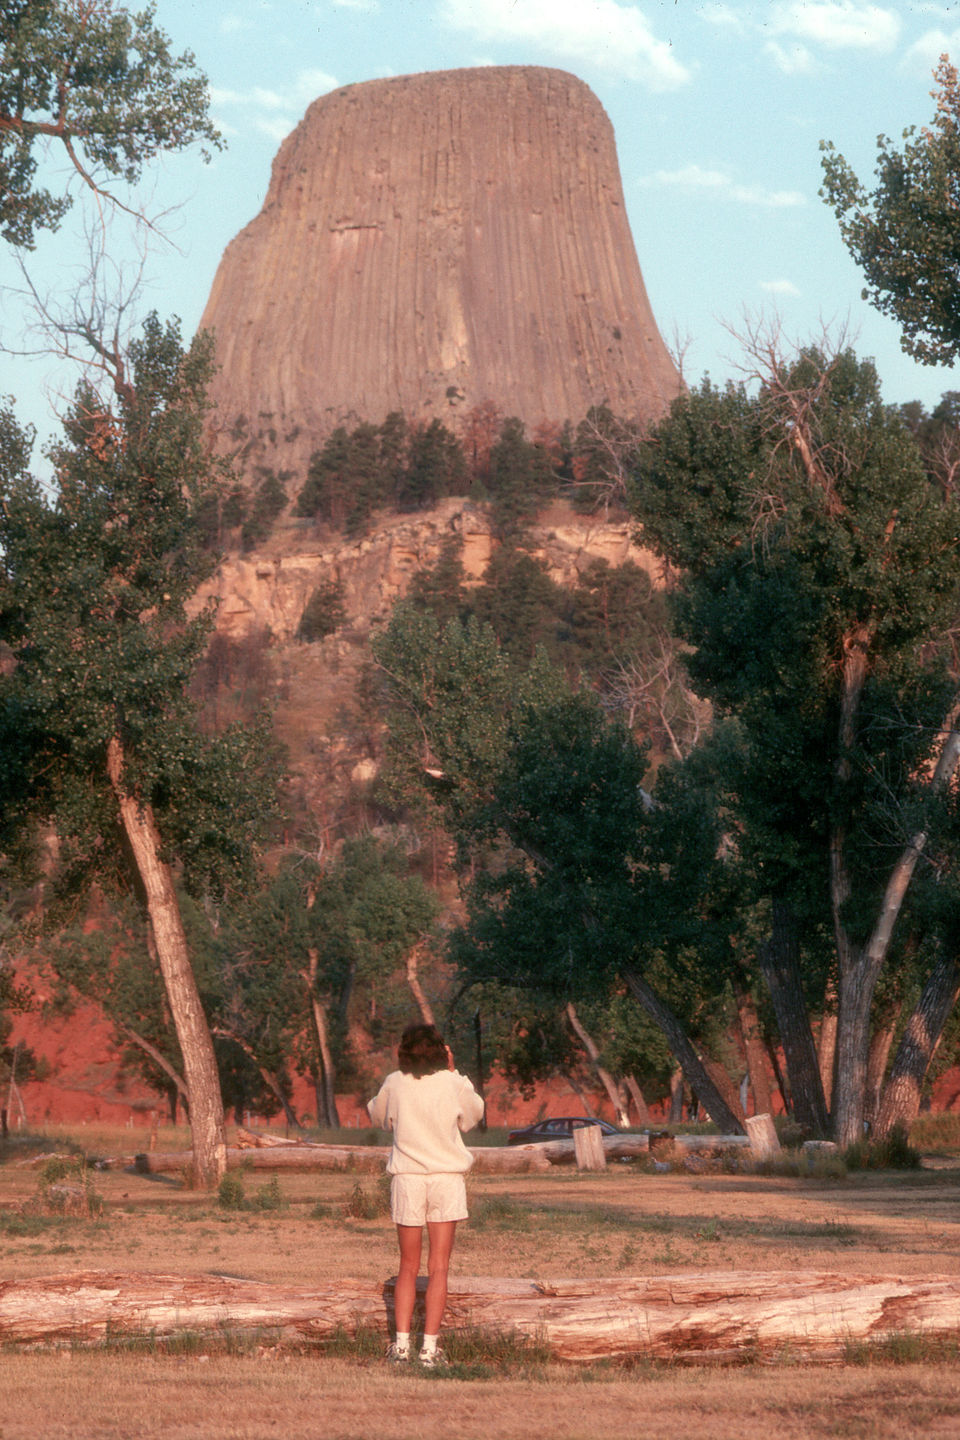 Lolo by Devil's Tower at sunrise